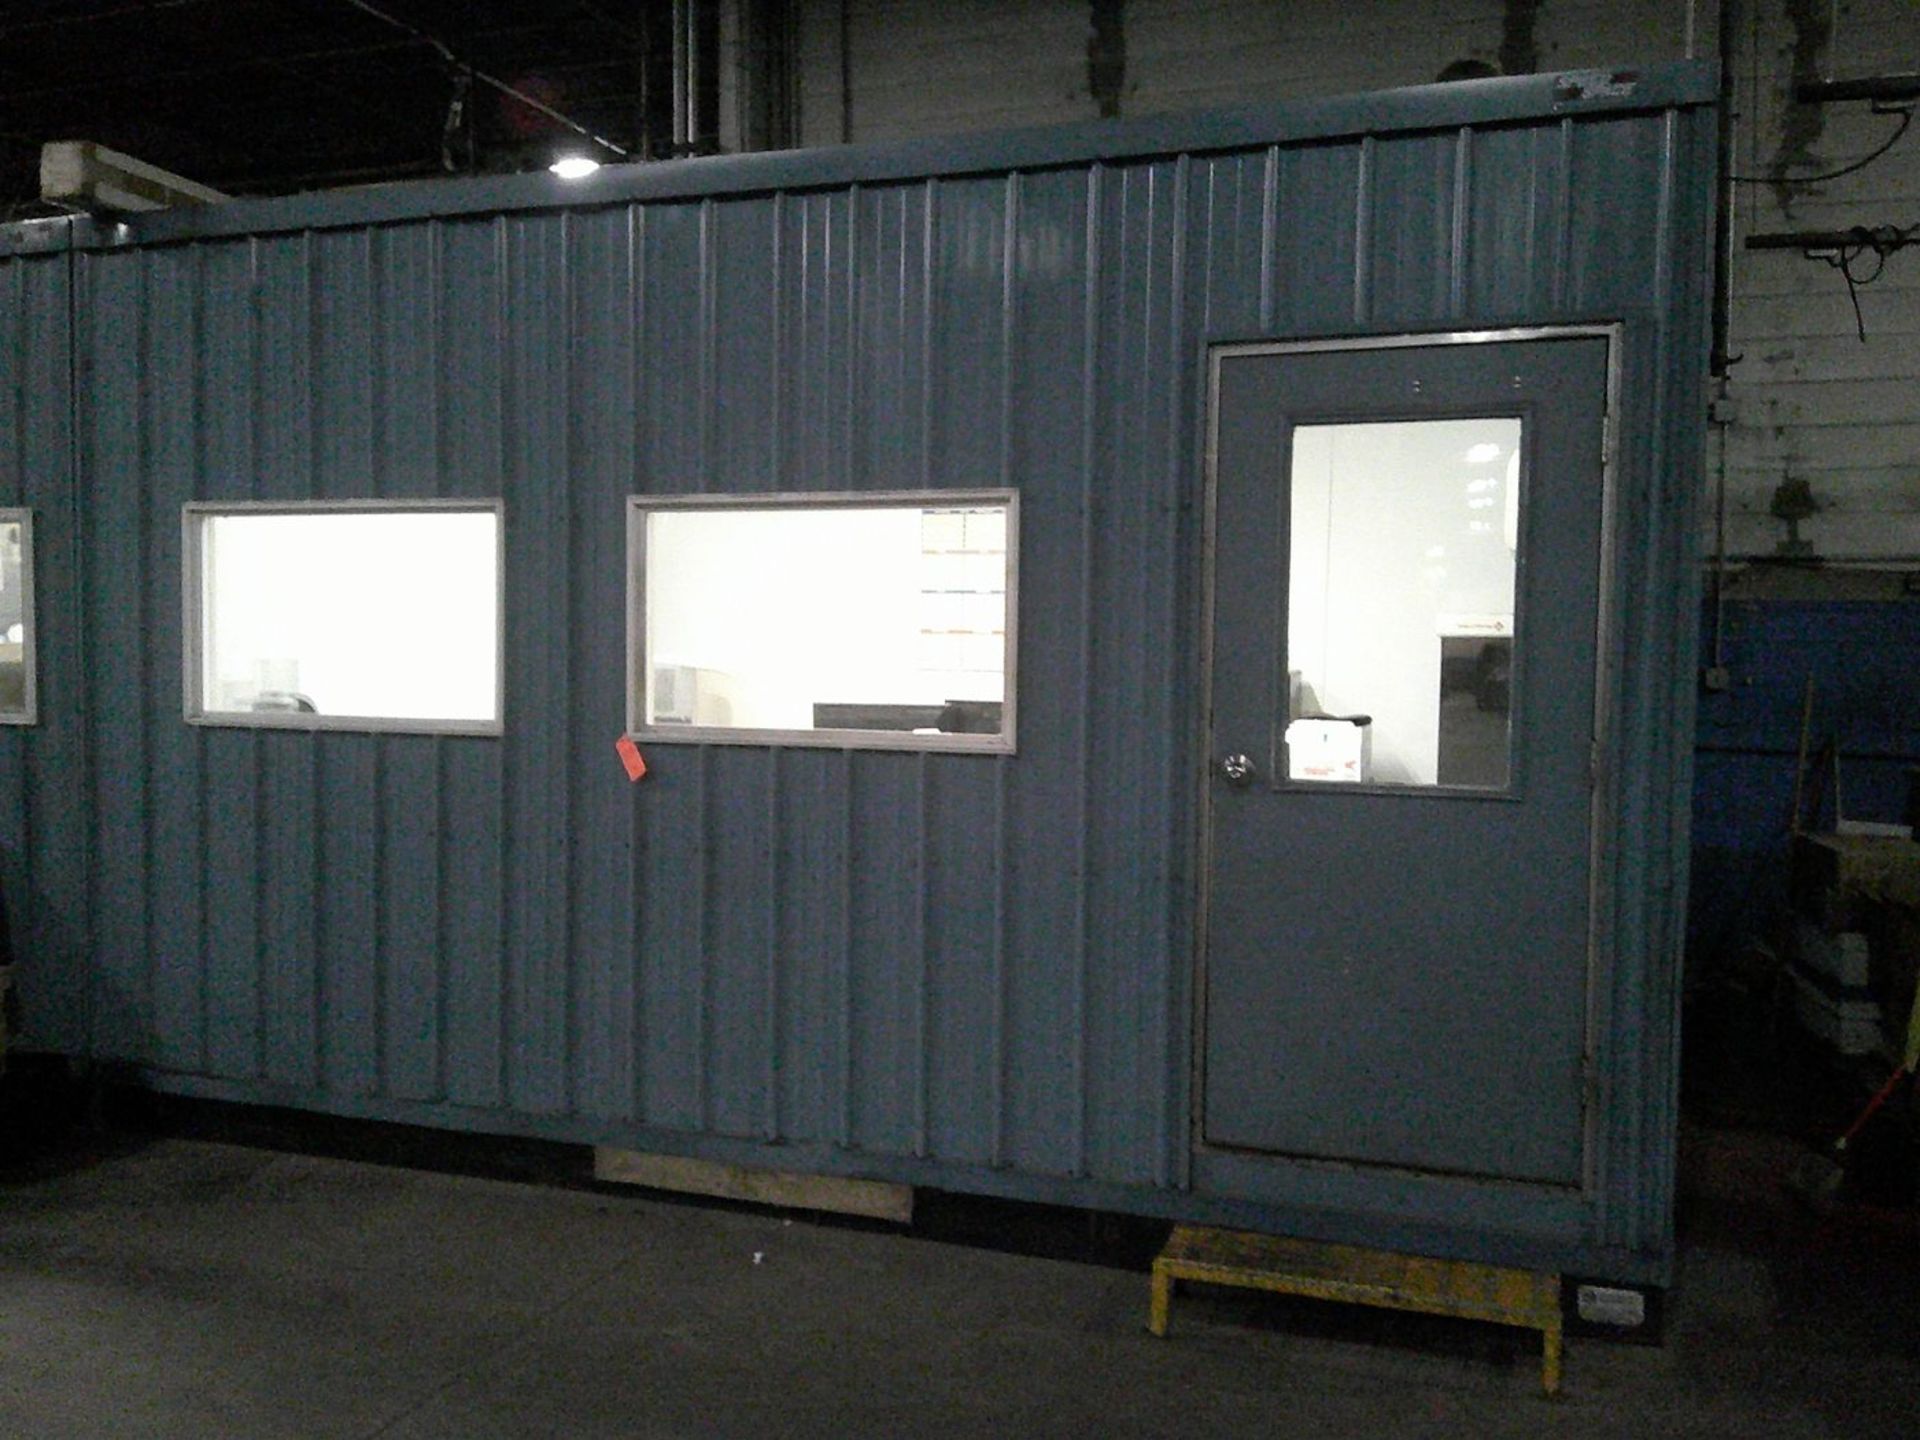 Speed Space 140" x 136" x 114" High Steel Modular Shop Office; with Door, Air Conditioner, Windows - Image 3 of 6